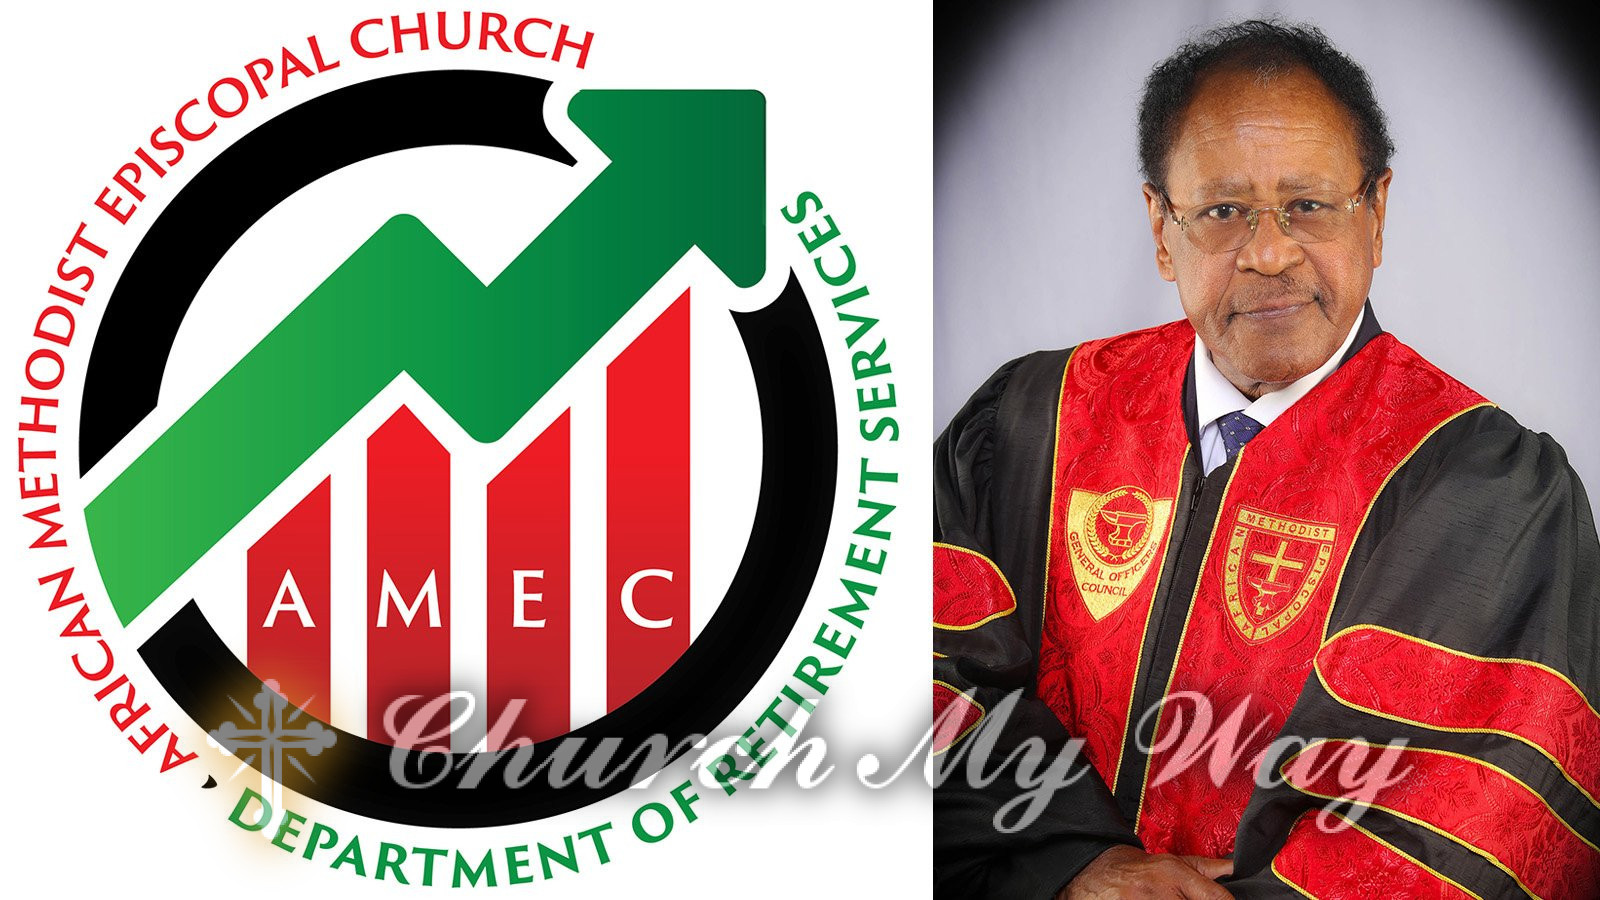 The Rev. Jerome V. Harris, right, was executive director of the AME Department of Retirement Services for more than two decades. Images via AME Church